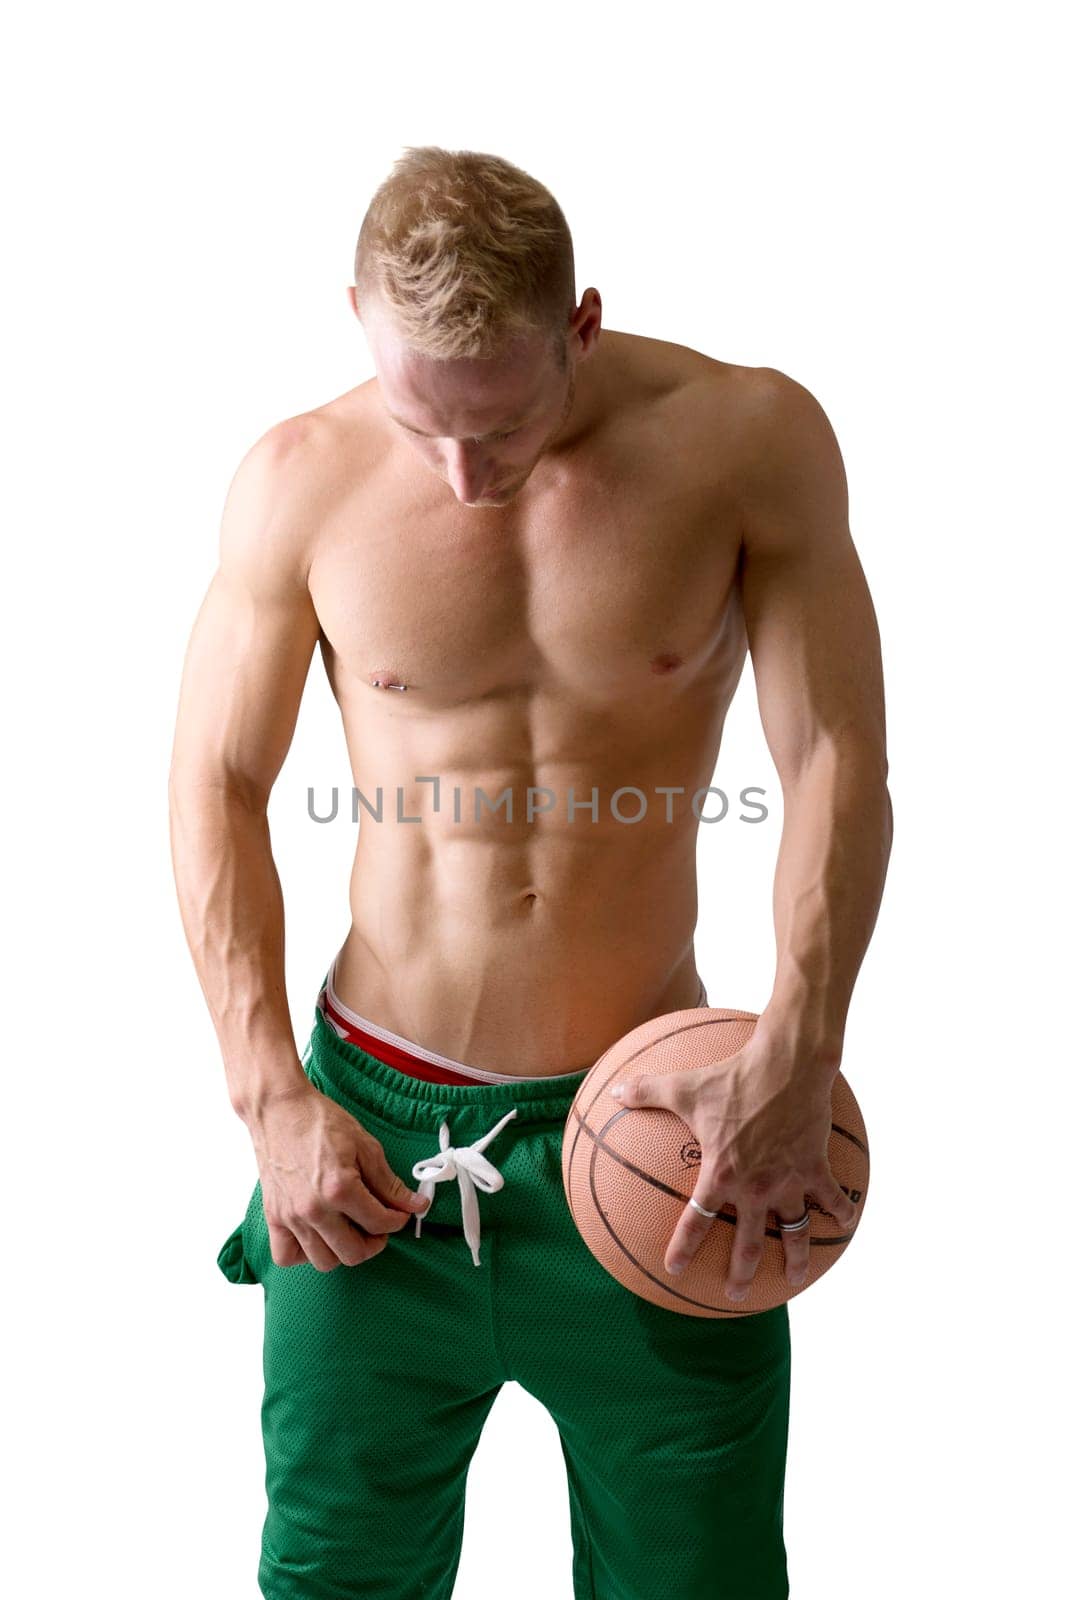 A man in green shorts holding a basketball